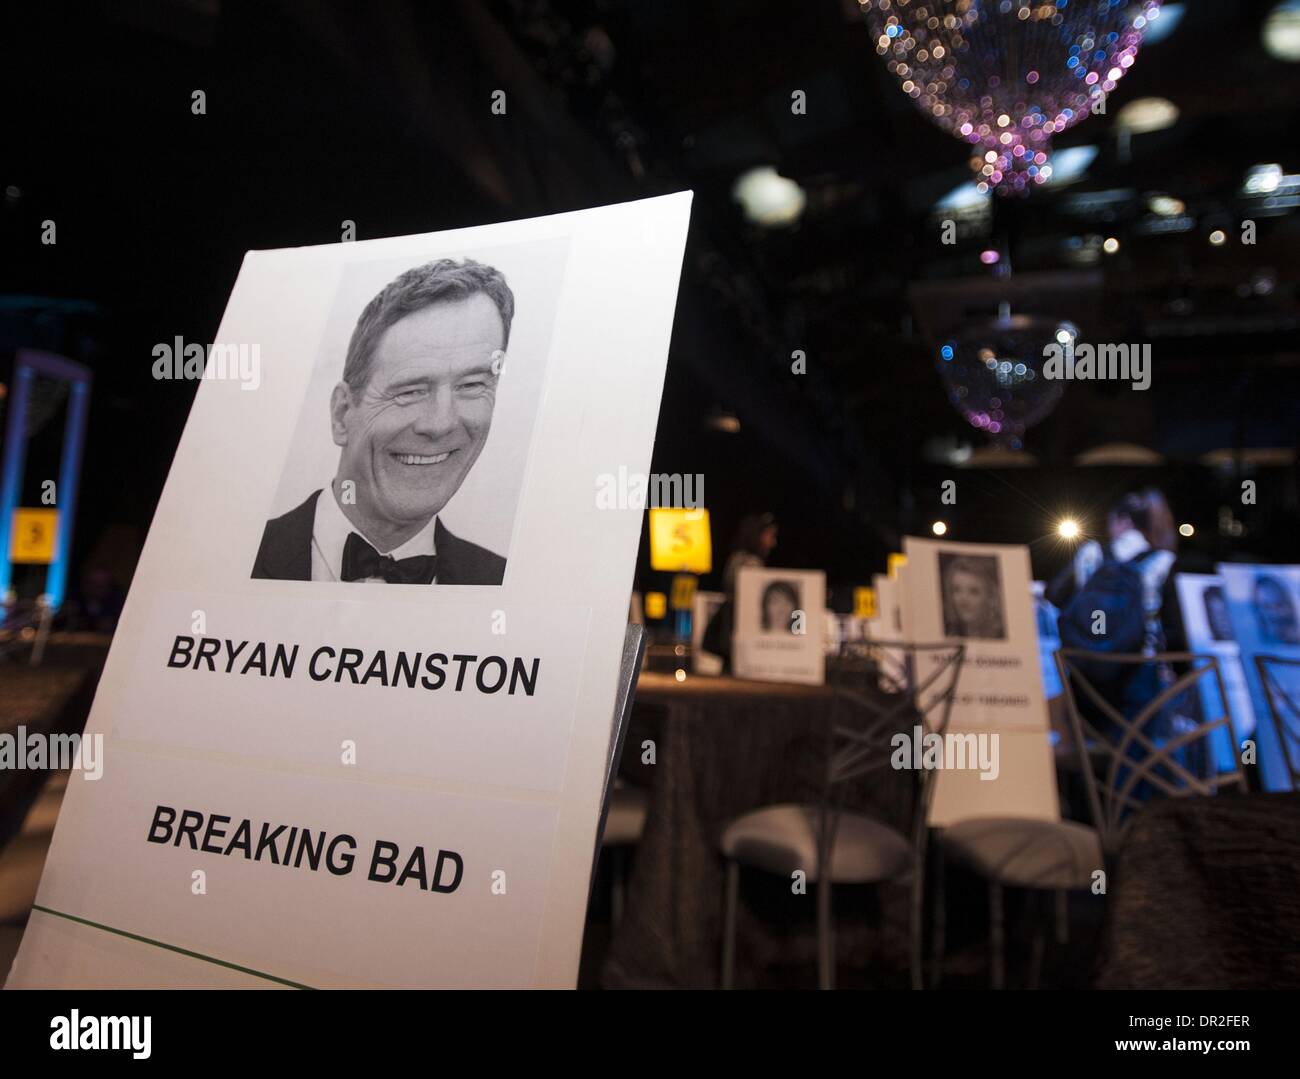 Los Angeles, California, USA. 17th Jan, 2014. Bryan Cranston/Breaking Bad.----The Screen Actors Guild made their final preparations on Friday morning January 17, 2014, for what will be this year's 20th SAG Awards event Saturday, January 18, 2014 at the Shrine Auditorium in Los Angeles. Set-up crews pulled out the red carpet as they finalized lighting and place tv cameras for Saturday as workers got ready for a closed dress rehearsal later today. The SAG awards honors tv and films as well as the individual actors and actresses and voted by the members themselves. (Credit Image: © David Bro/Z Stock Photo